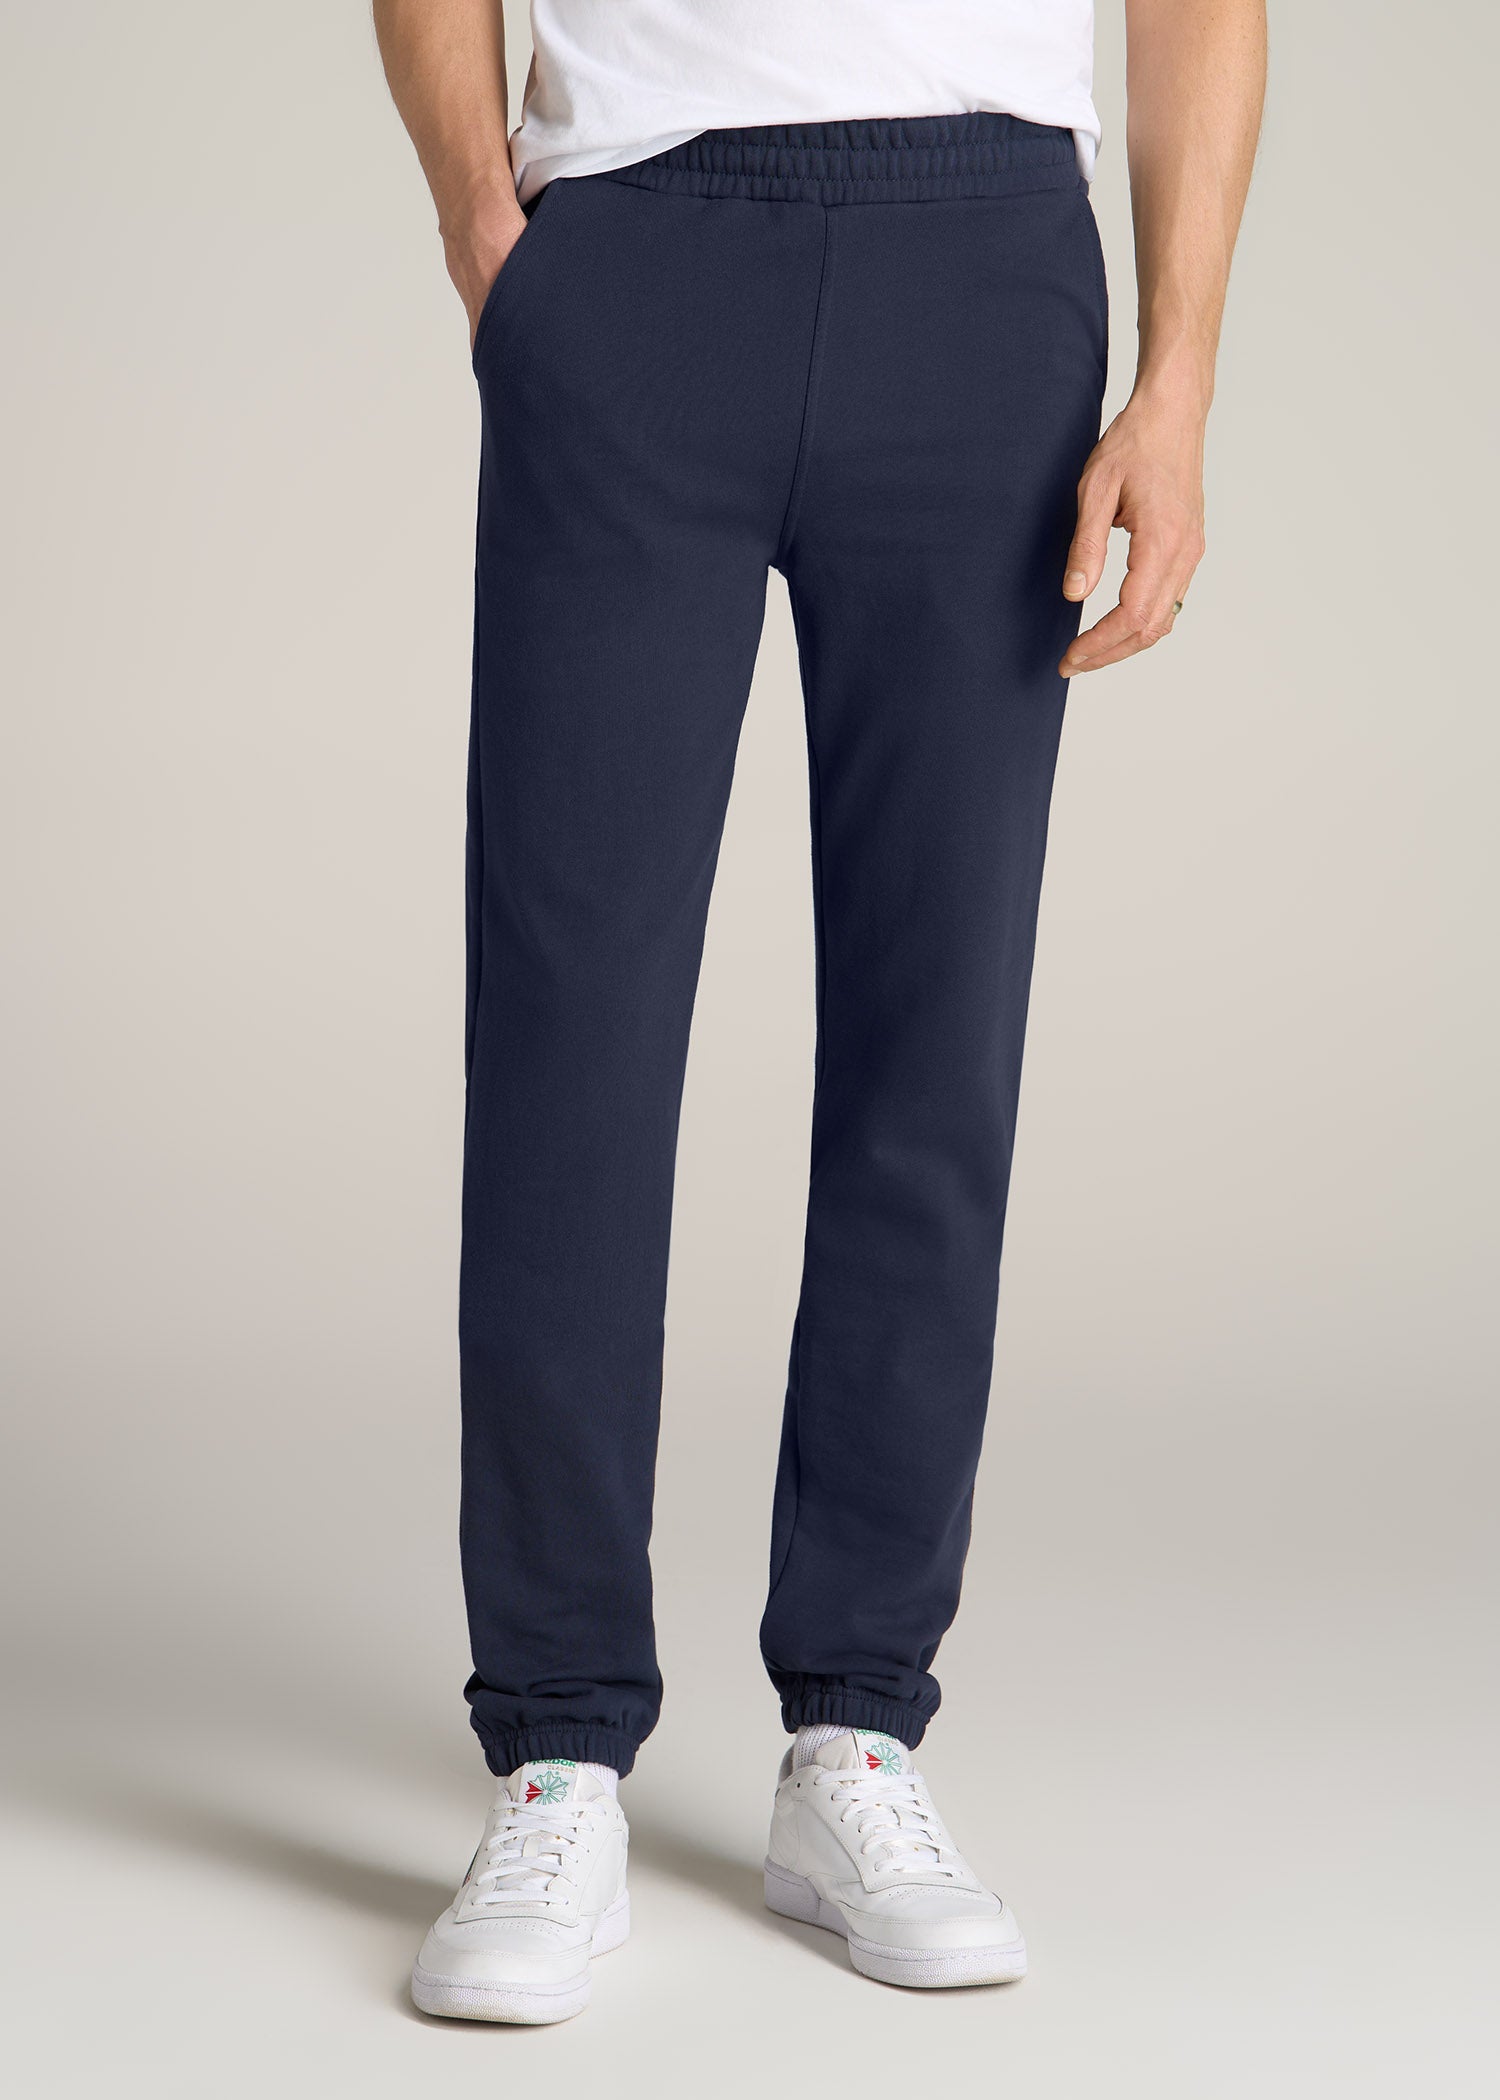 American-Tall-Men-Wearever-French-Terry-Sweatpants-Navy-front